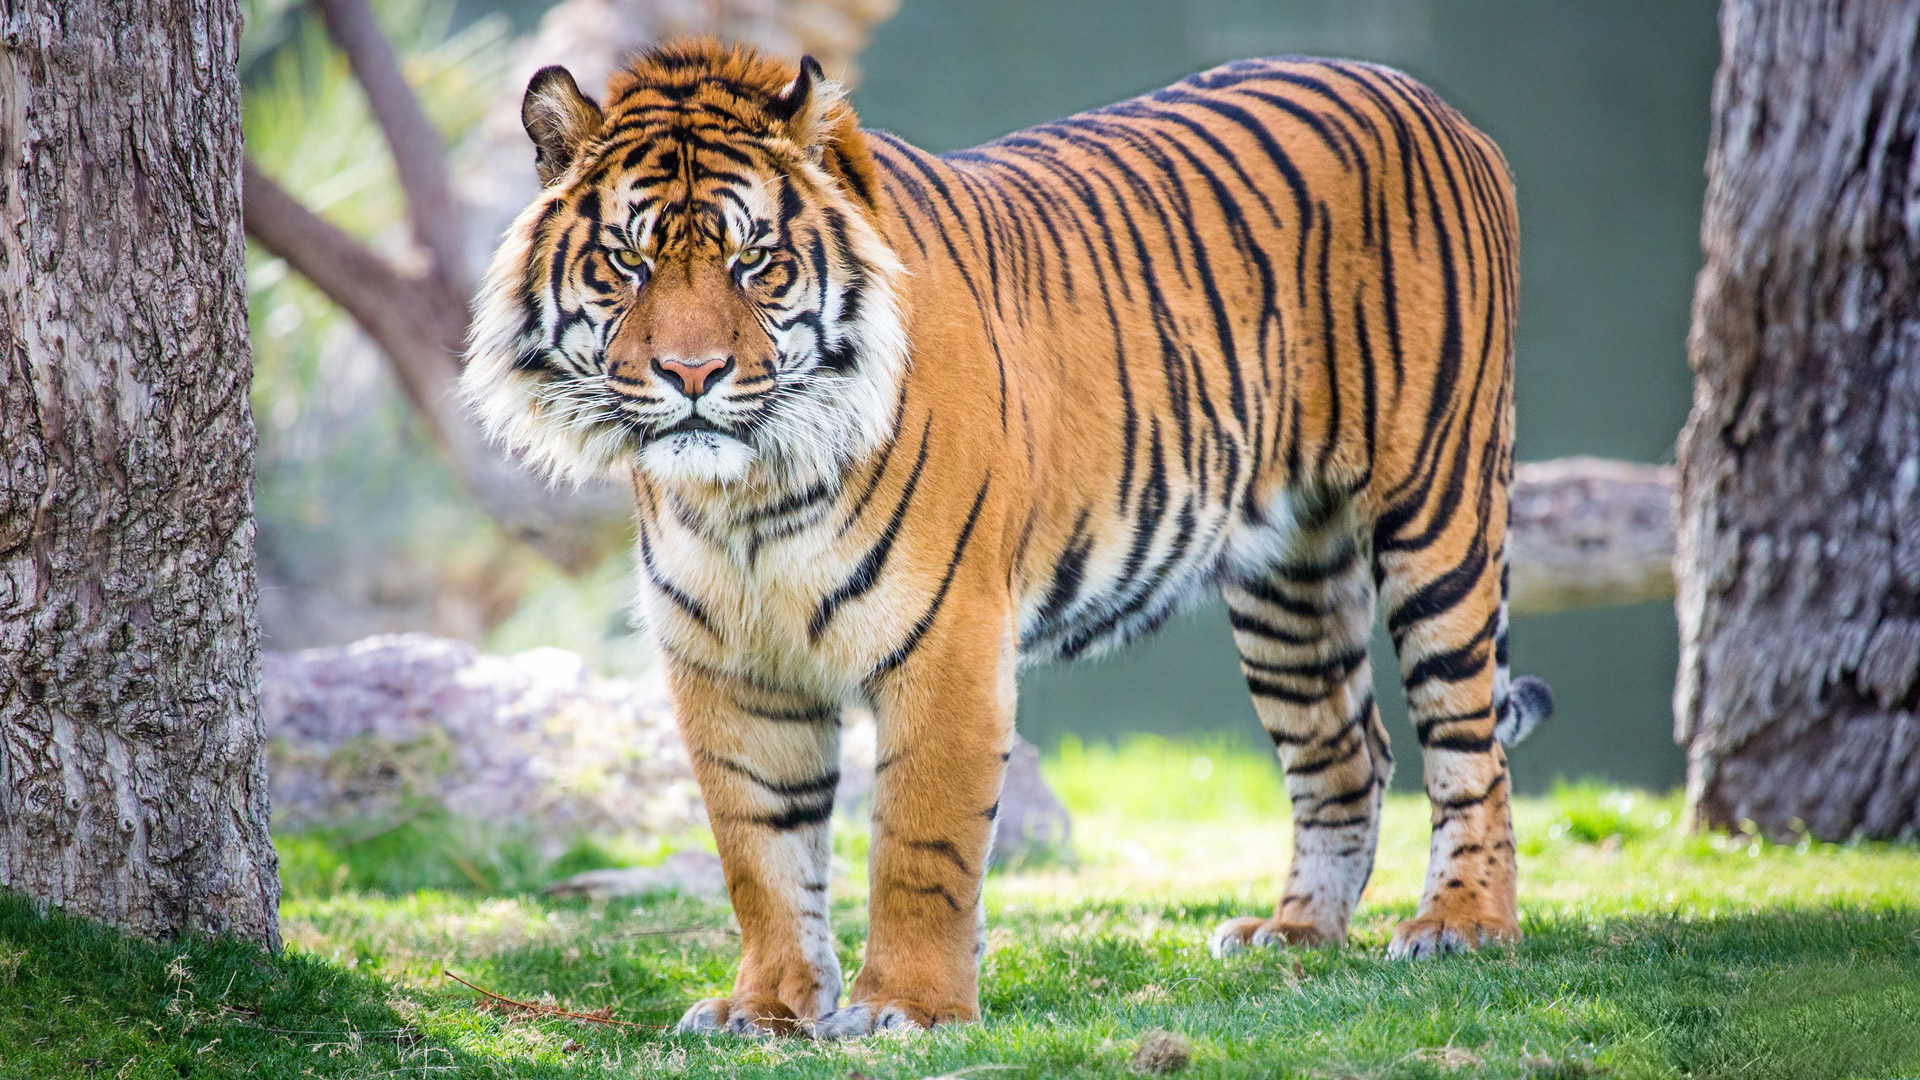 Tiger free download hd wallpapers | Only hd wallpapers